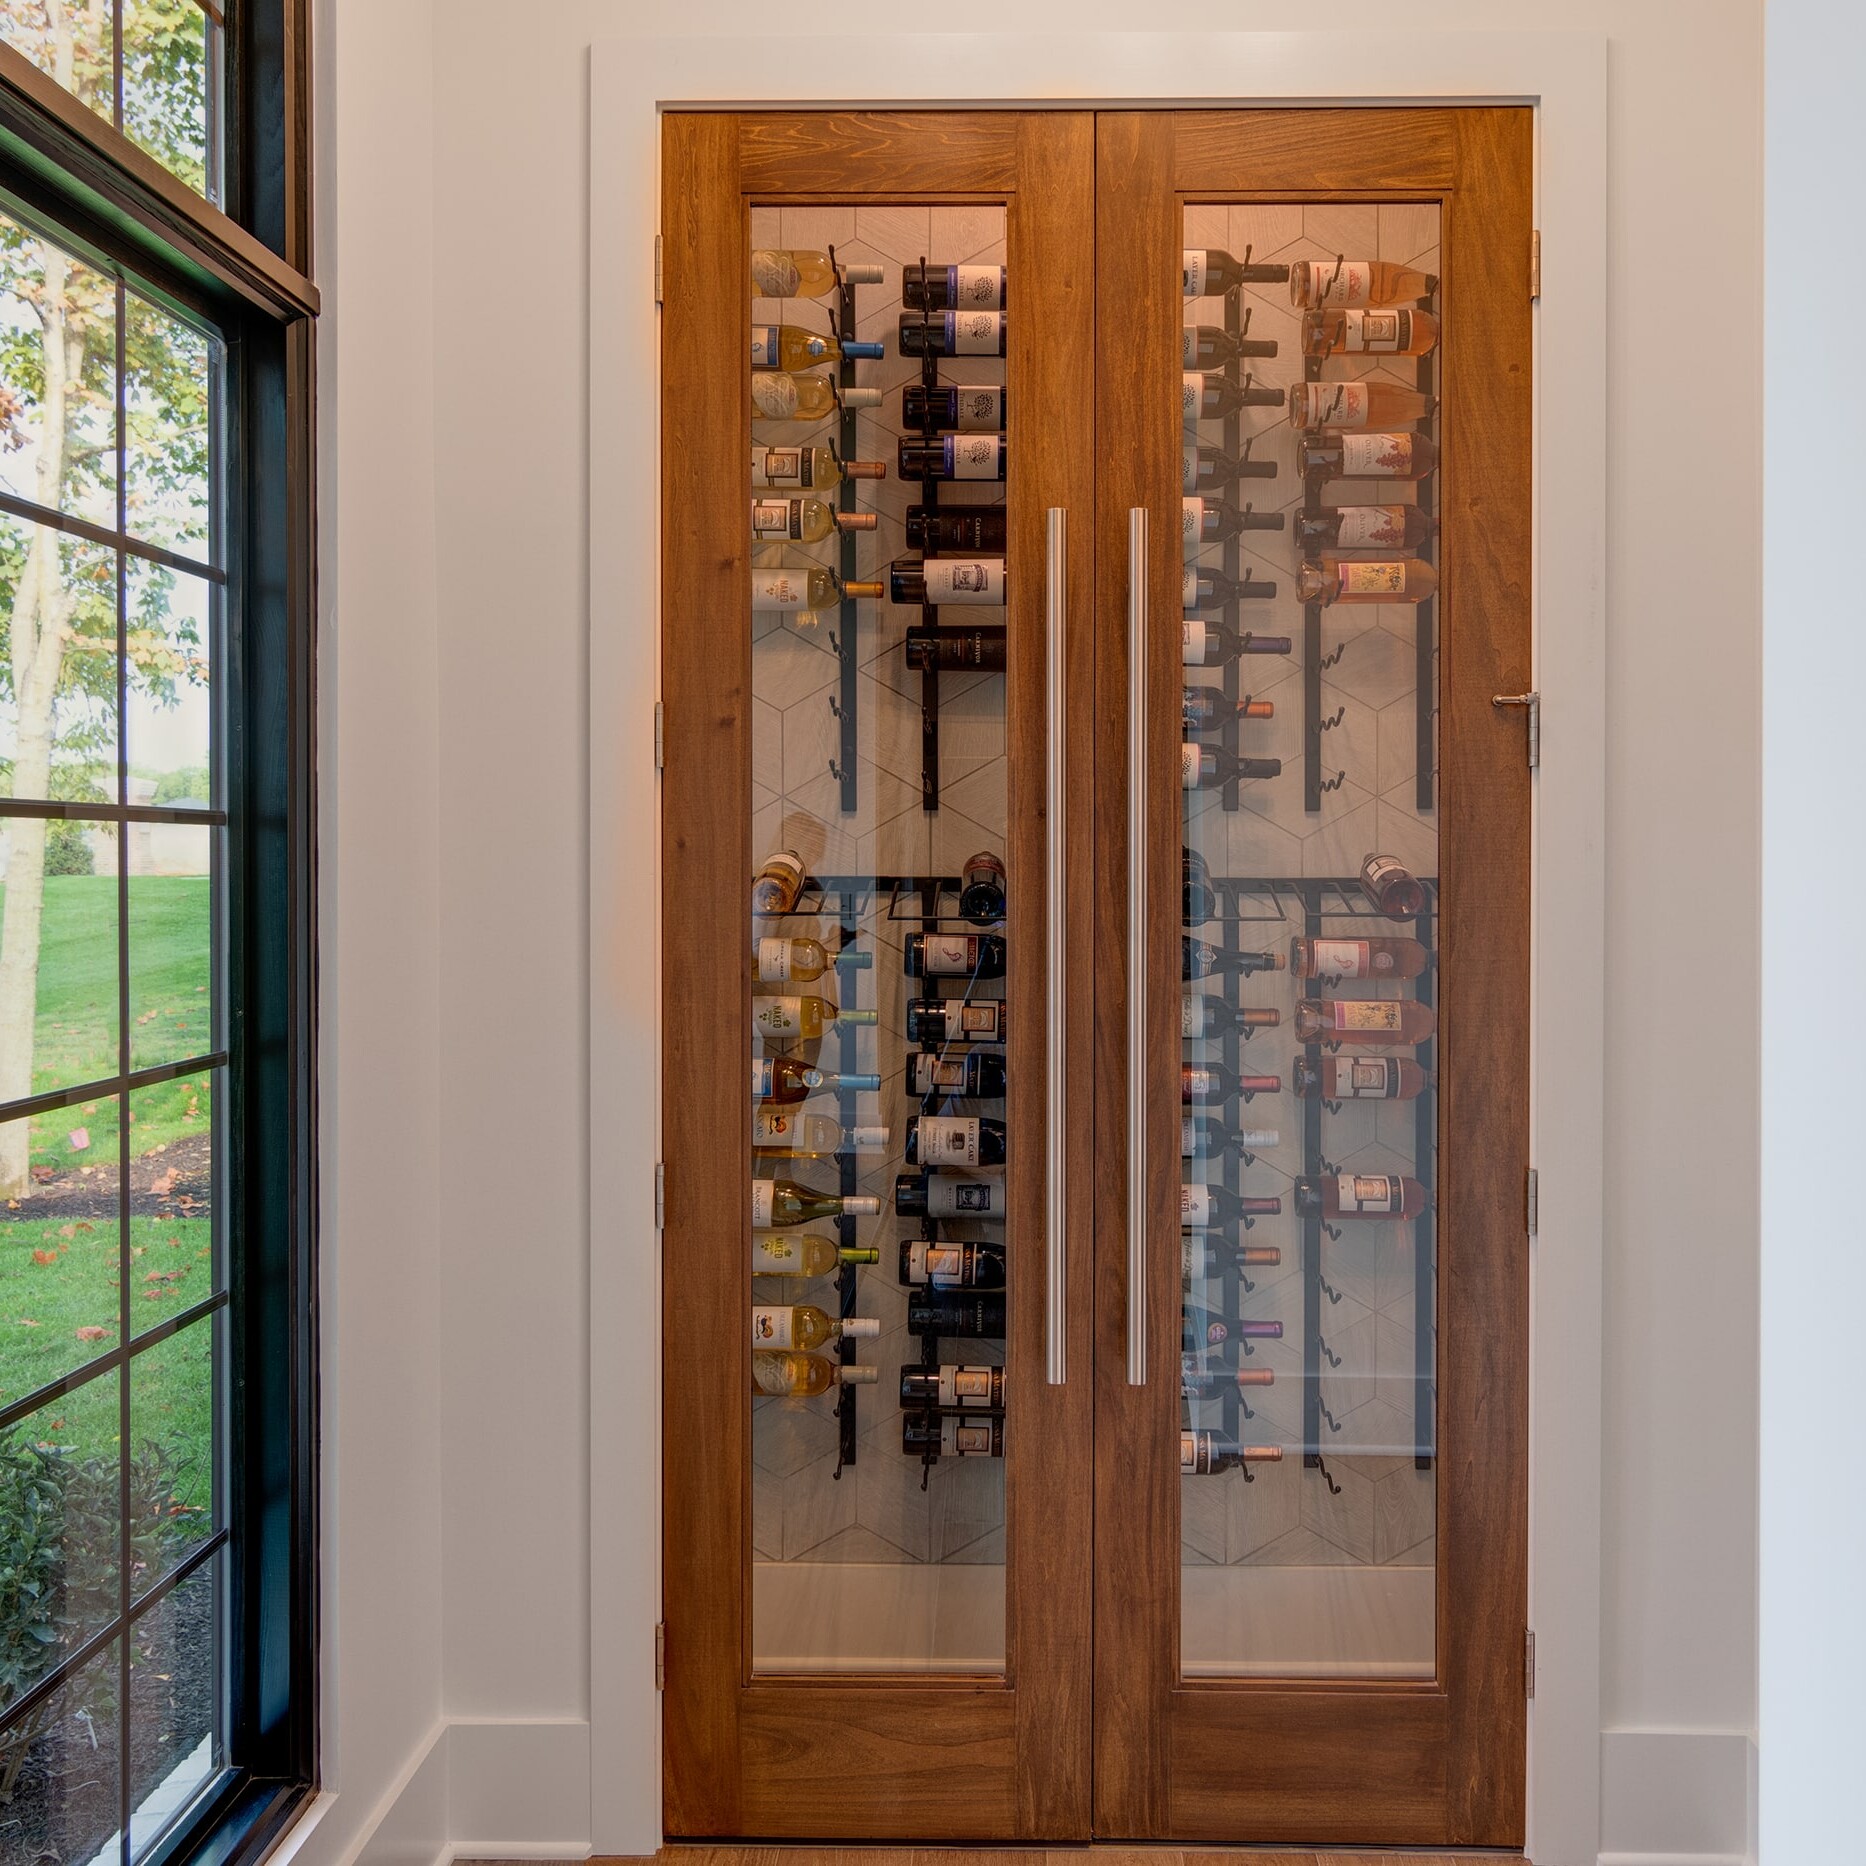 A wooden wine rack in a room with a window.